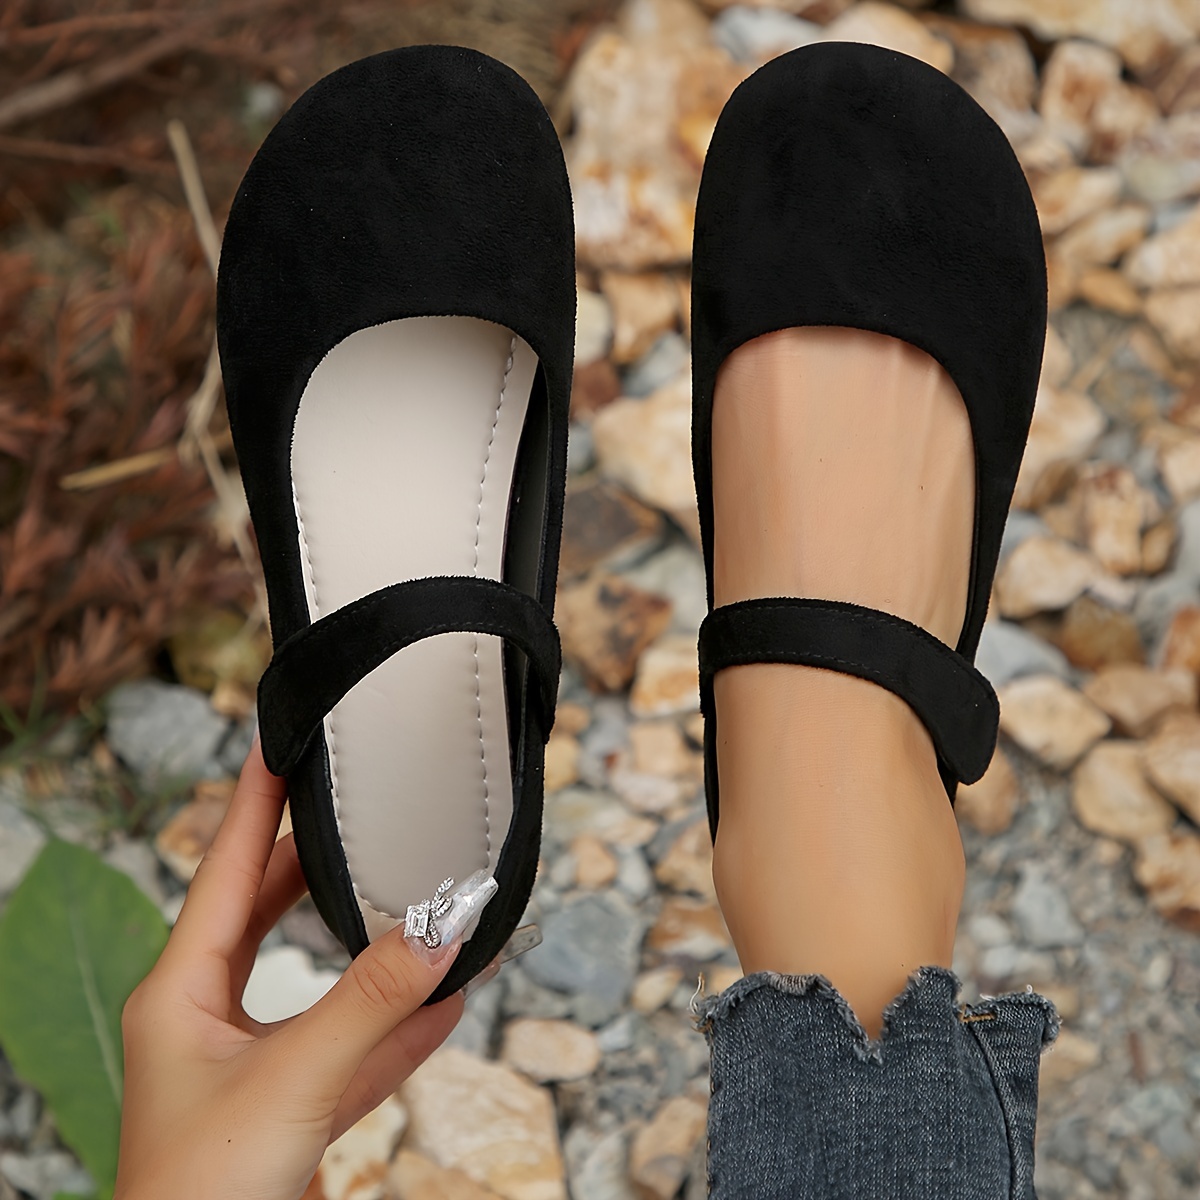 

Women's Comfy Flat Shoes, Round Toe Soft Sole Daily Shoes, All-match Minimalist Flats